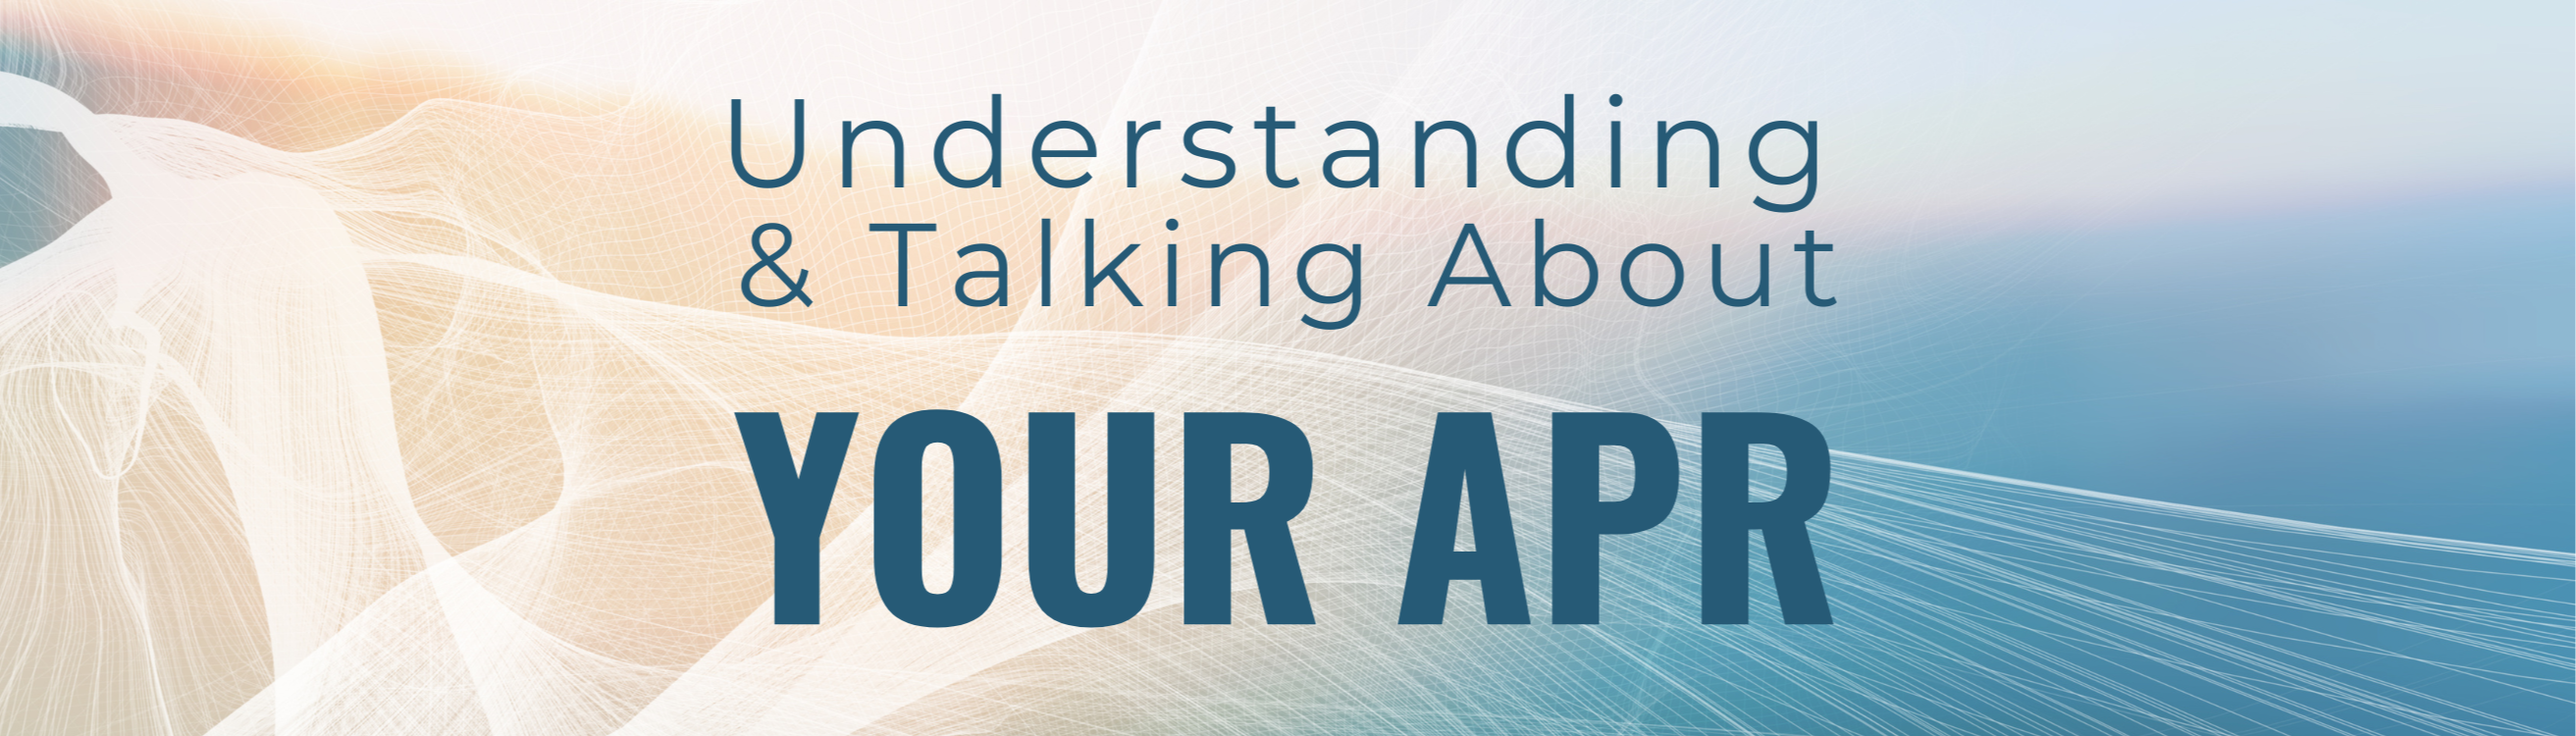 Understanding and Talking About Your APR